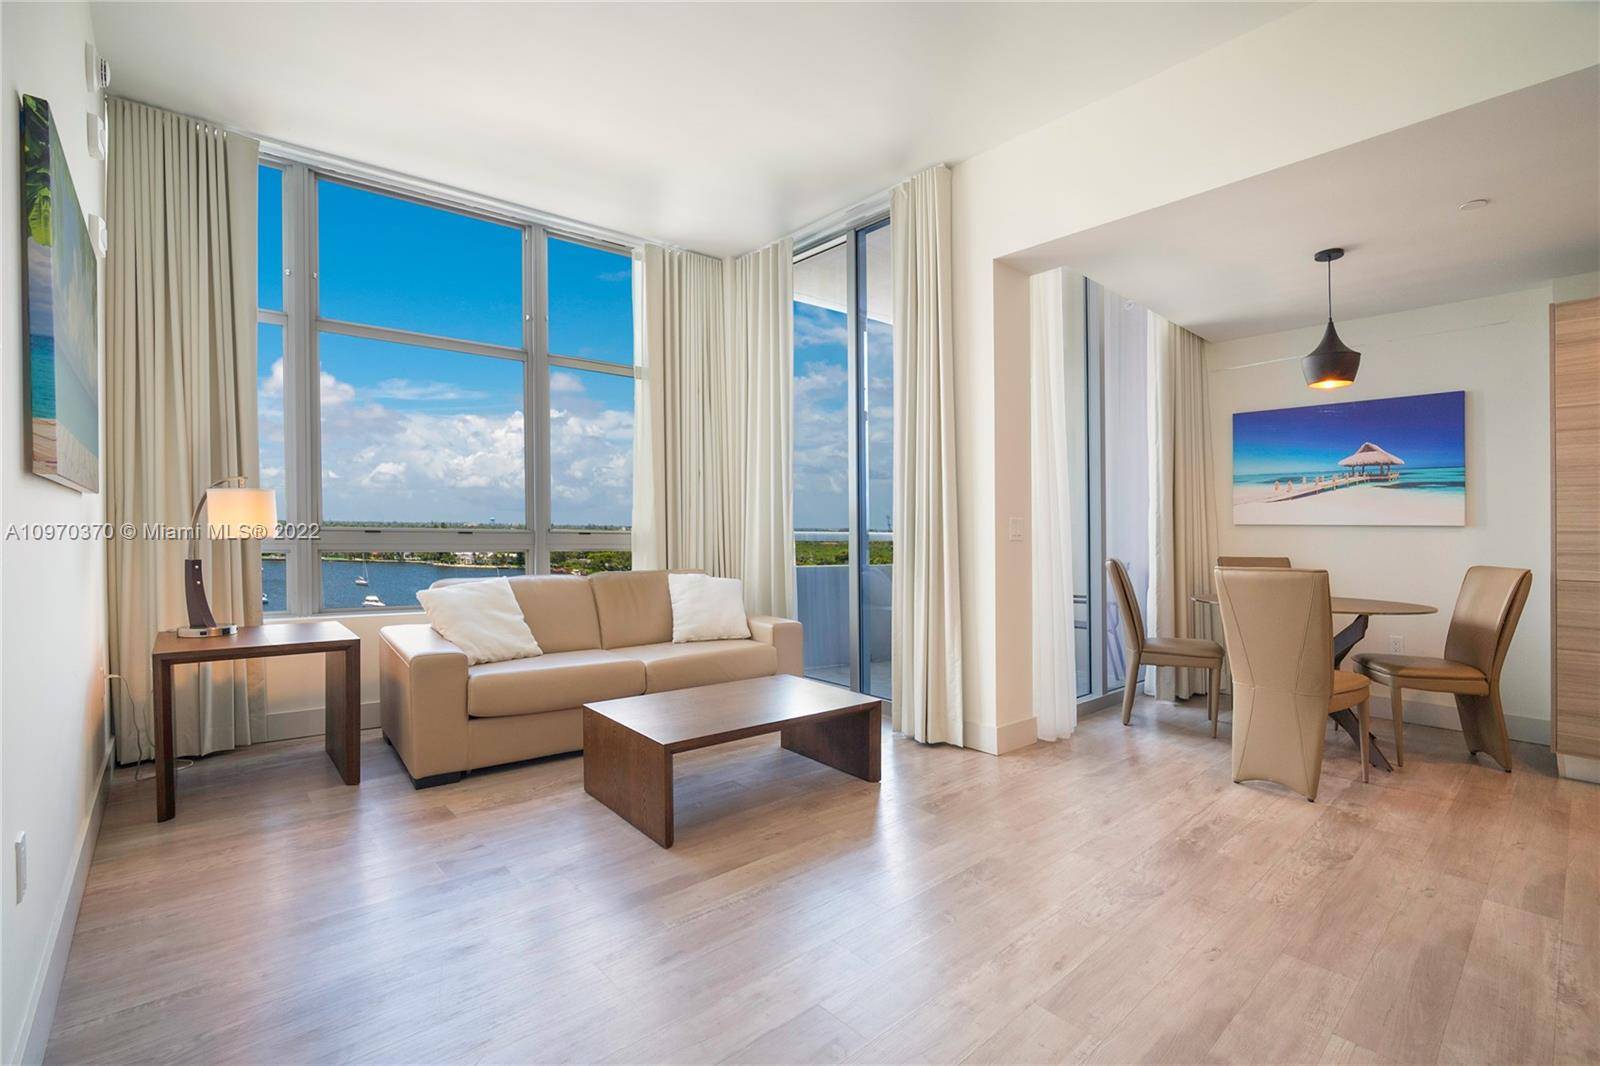 WELCOME TO COSTA HOLLYWOOD S331 A fully furnished apartment on one of the best beaches in Hollywood Beach.